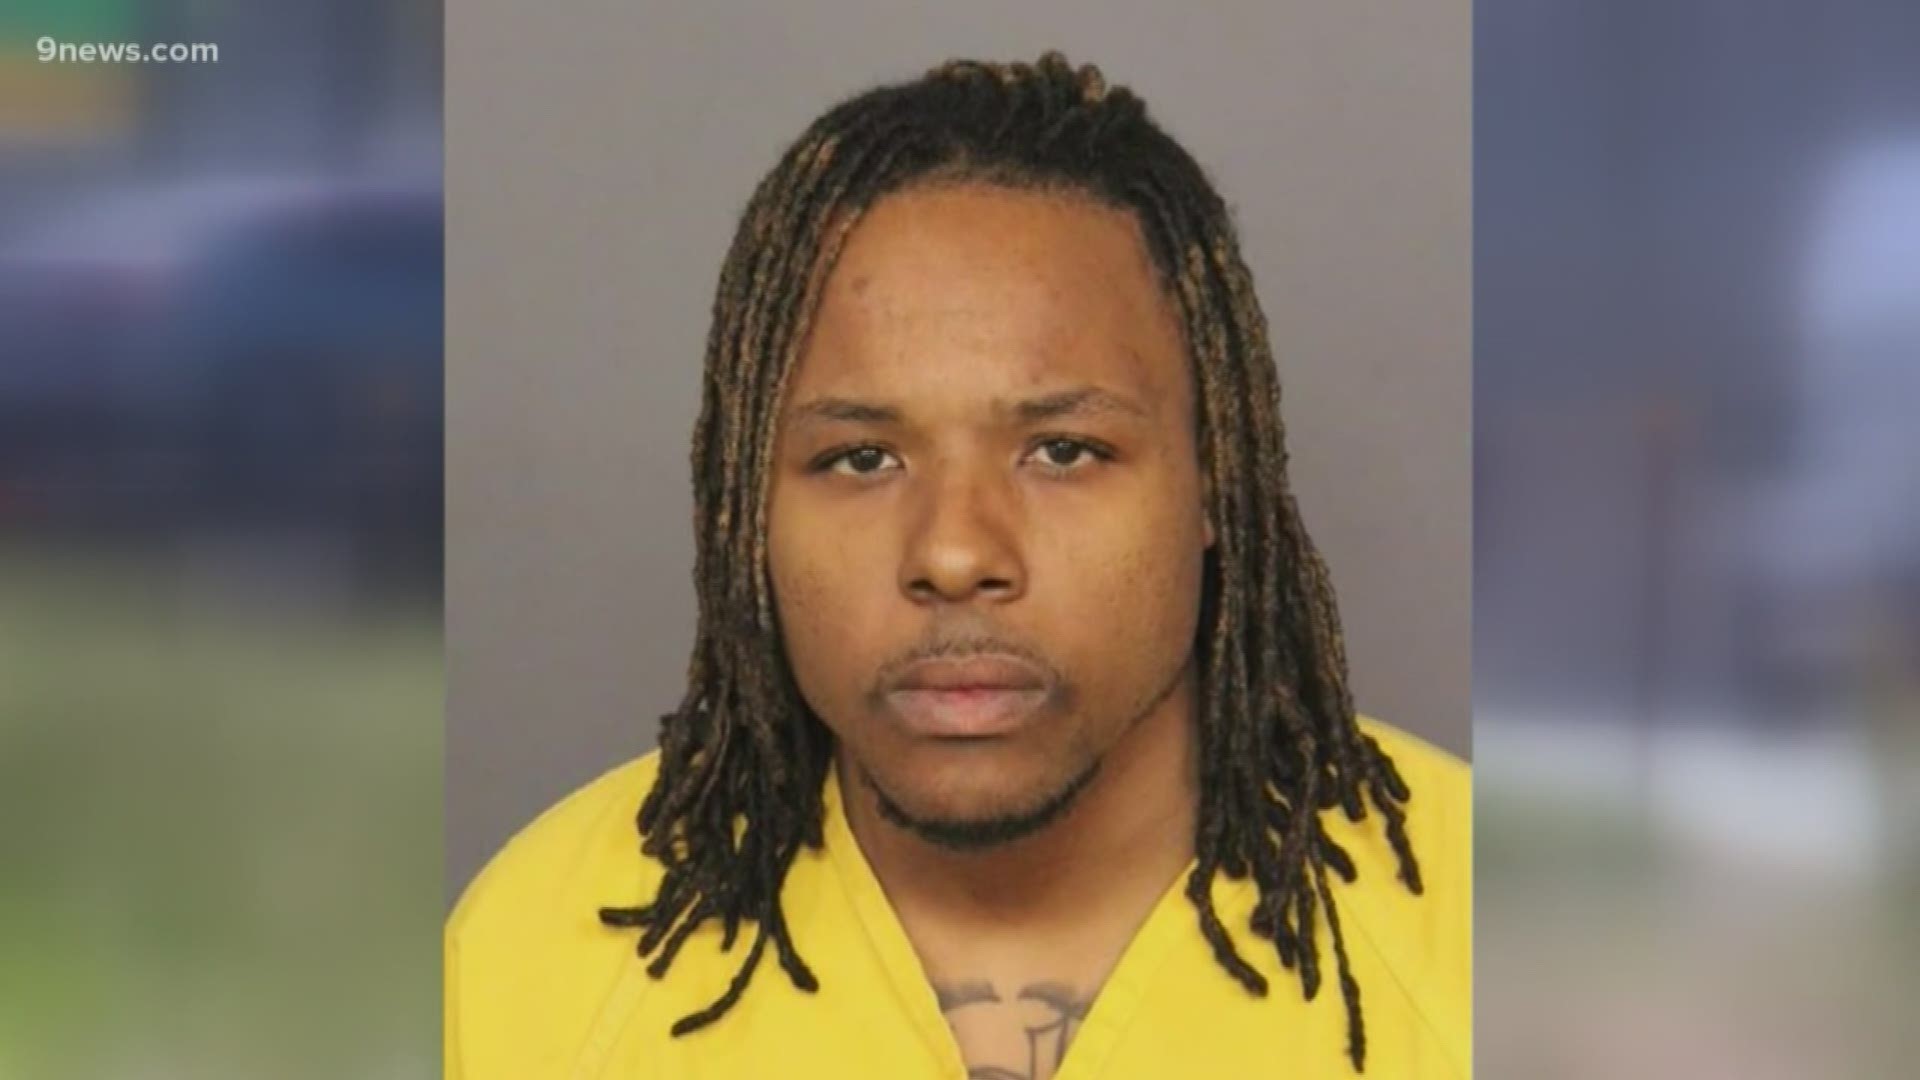 Prosecutors began calling witnesses Tuesday morning in the trial of the Uber driver accused of shooting and killing a passenger during an in-app ride last year.